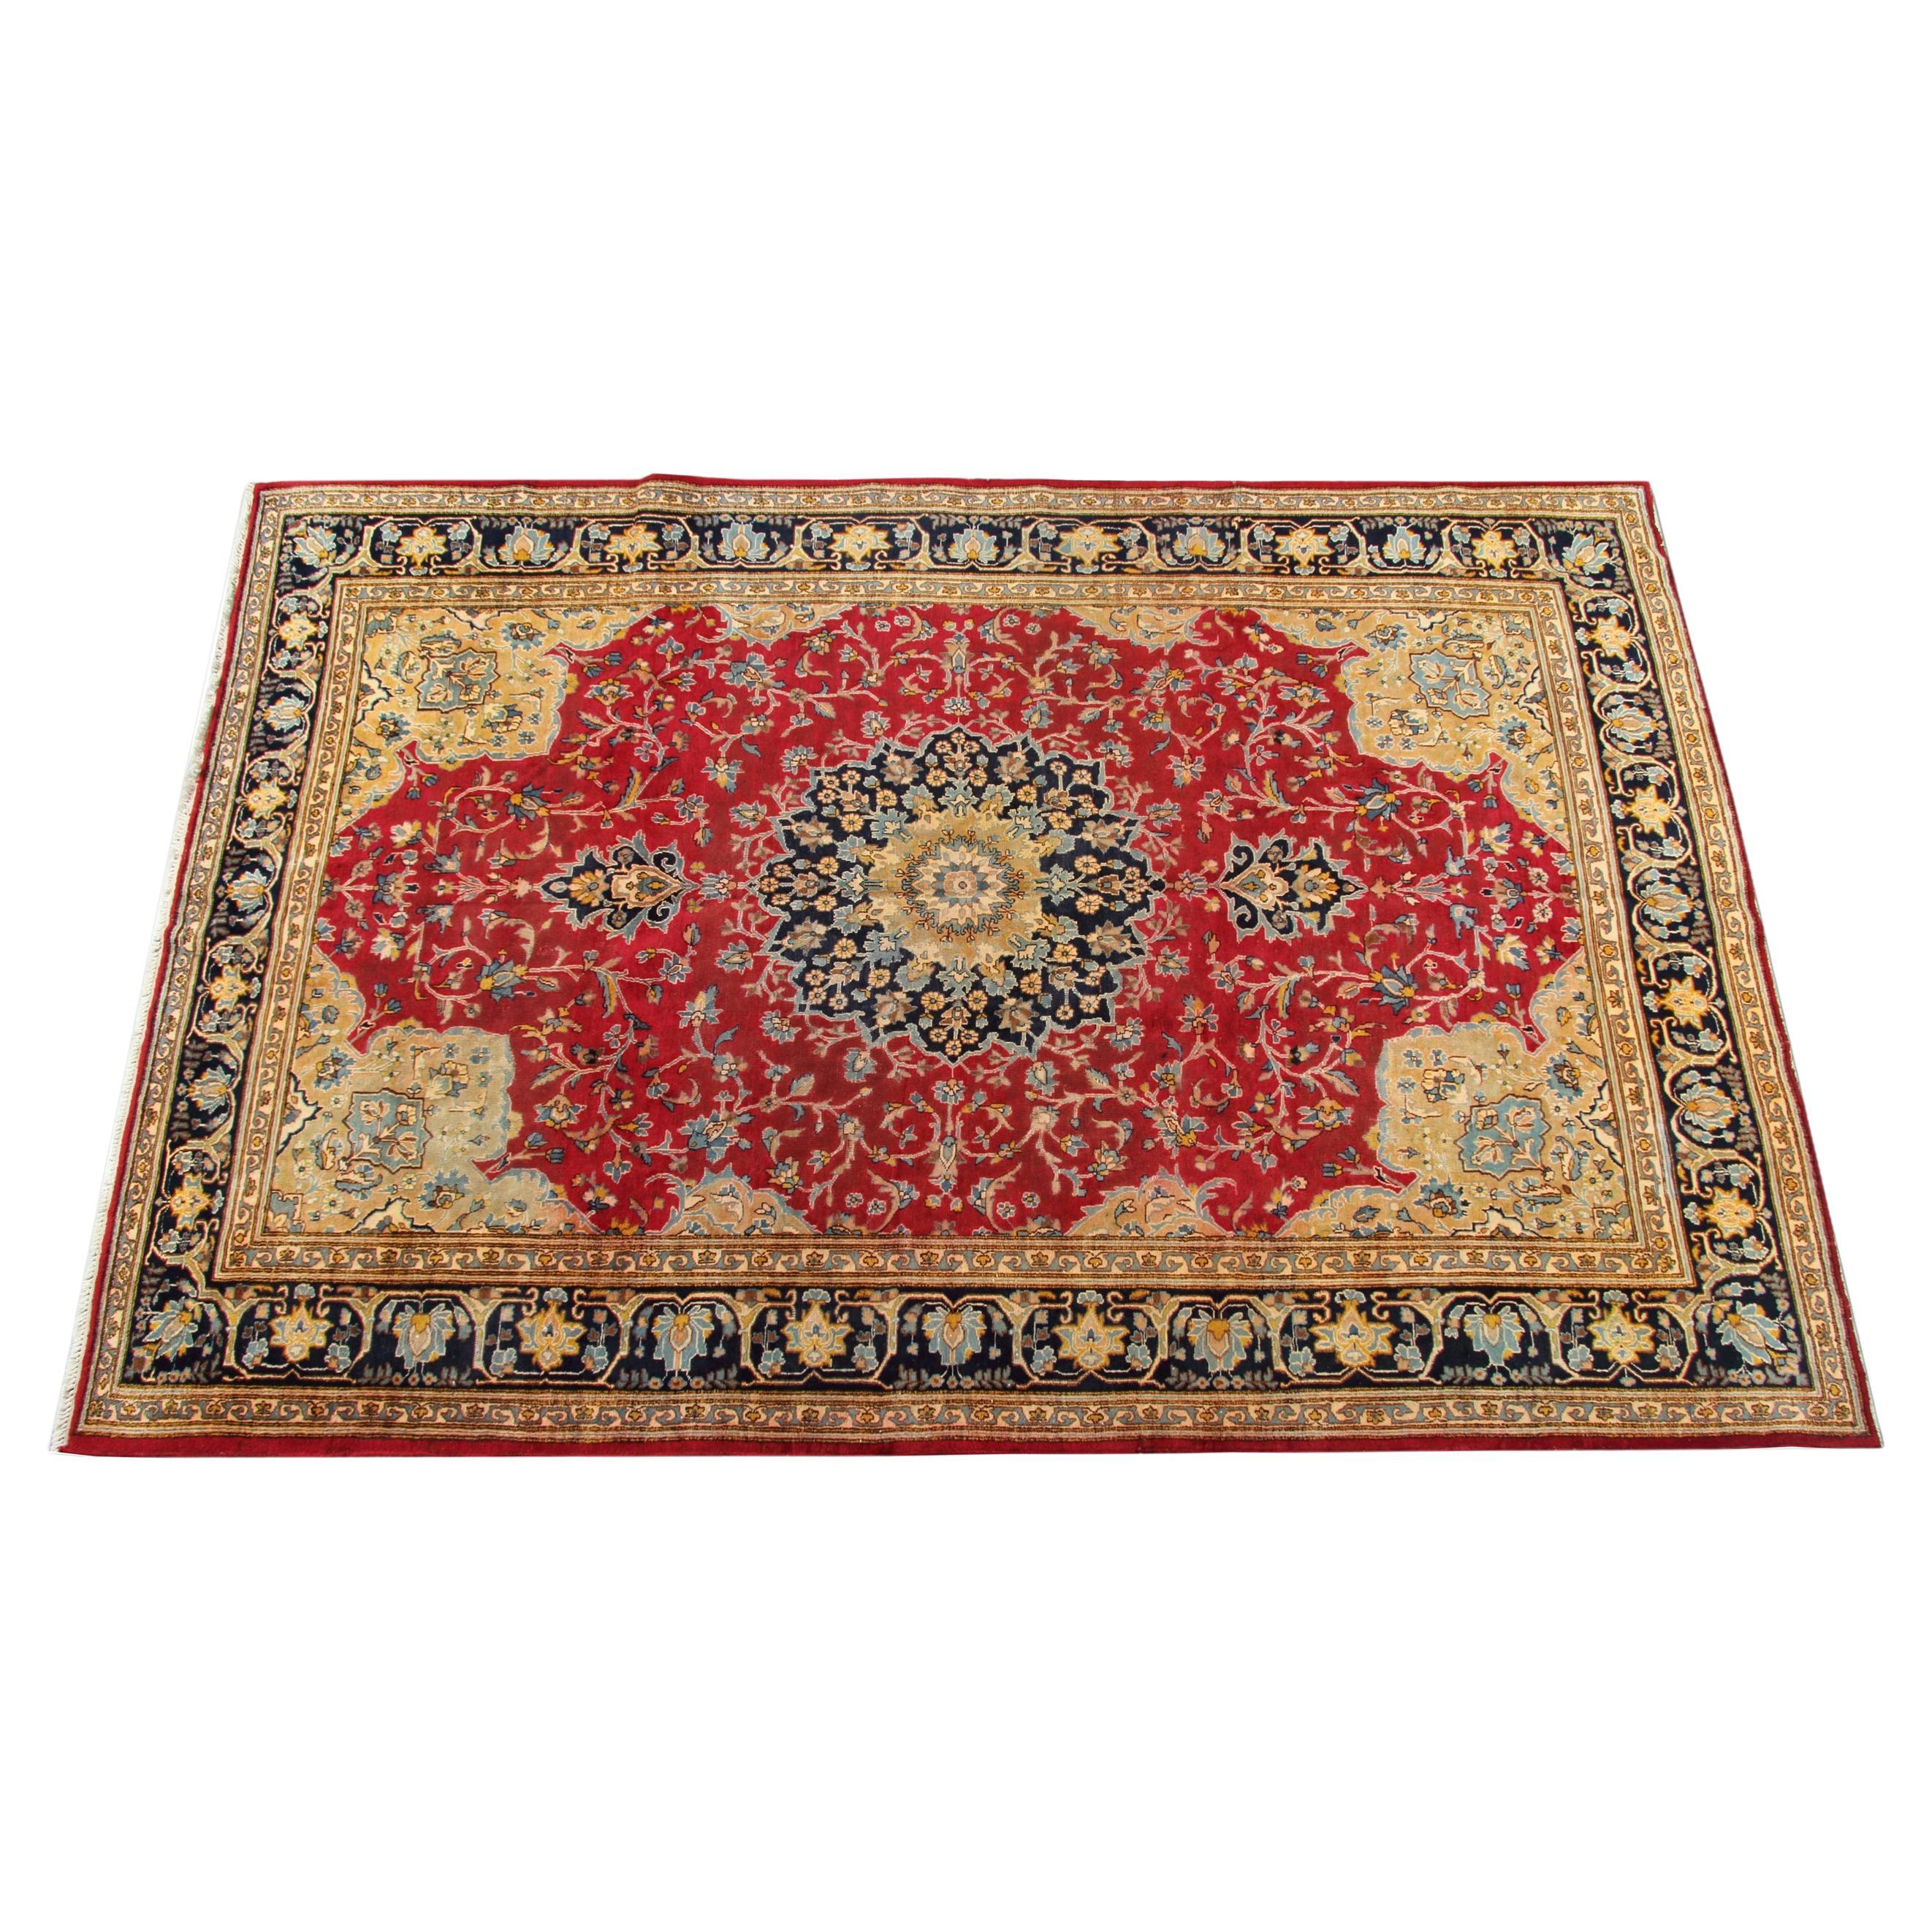 Decorated with a unique colour pallet of gold, red and deep blue this fantastic wool rug is sure to uplift any room its introduced to. Featuring a detailed central medallion with a highly-detailed floral surround design and border. The colour and